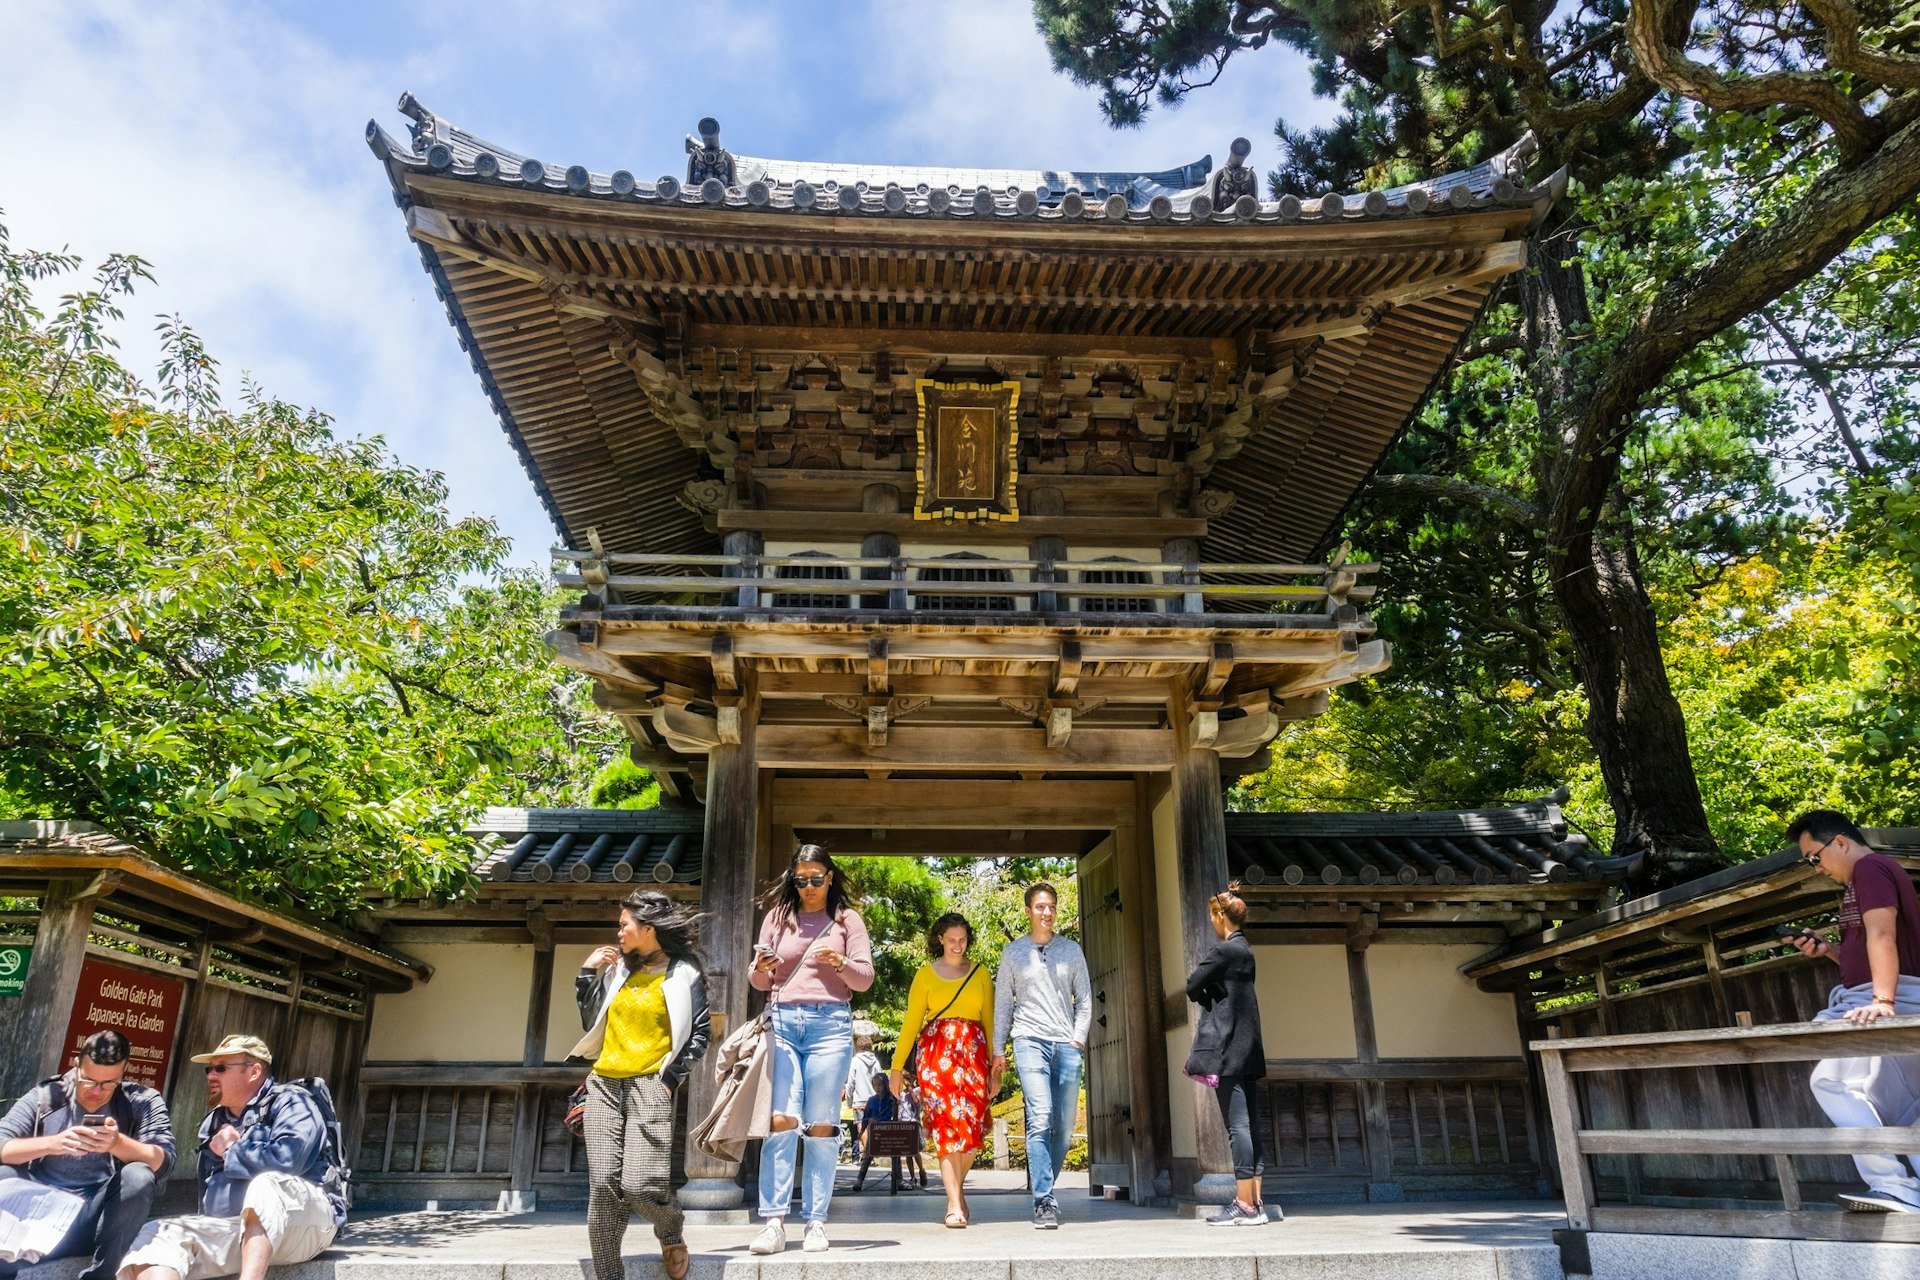 A wooden gateway marks the entrance to a Japanese Tea Garden. Tourists are milling around out front 